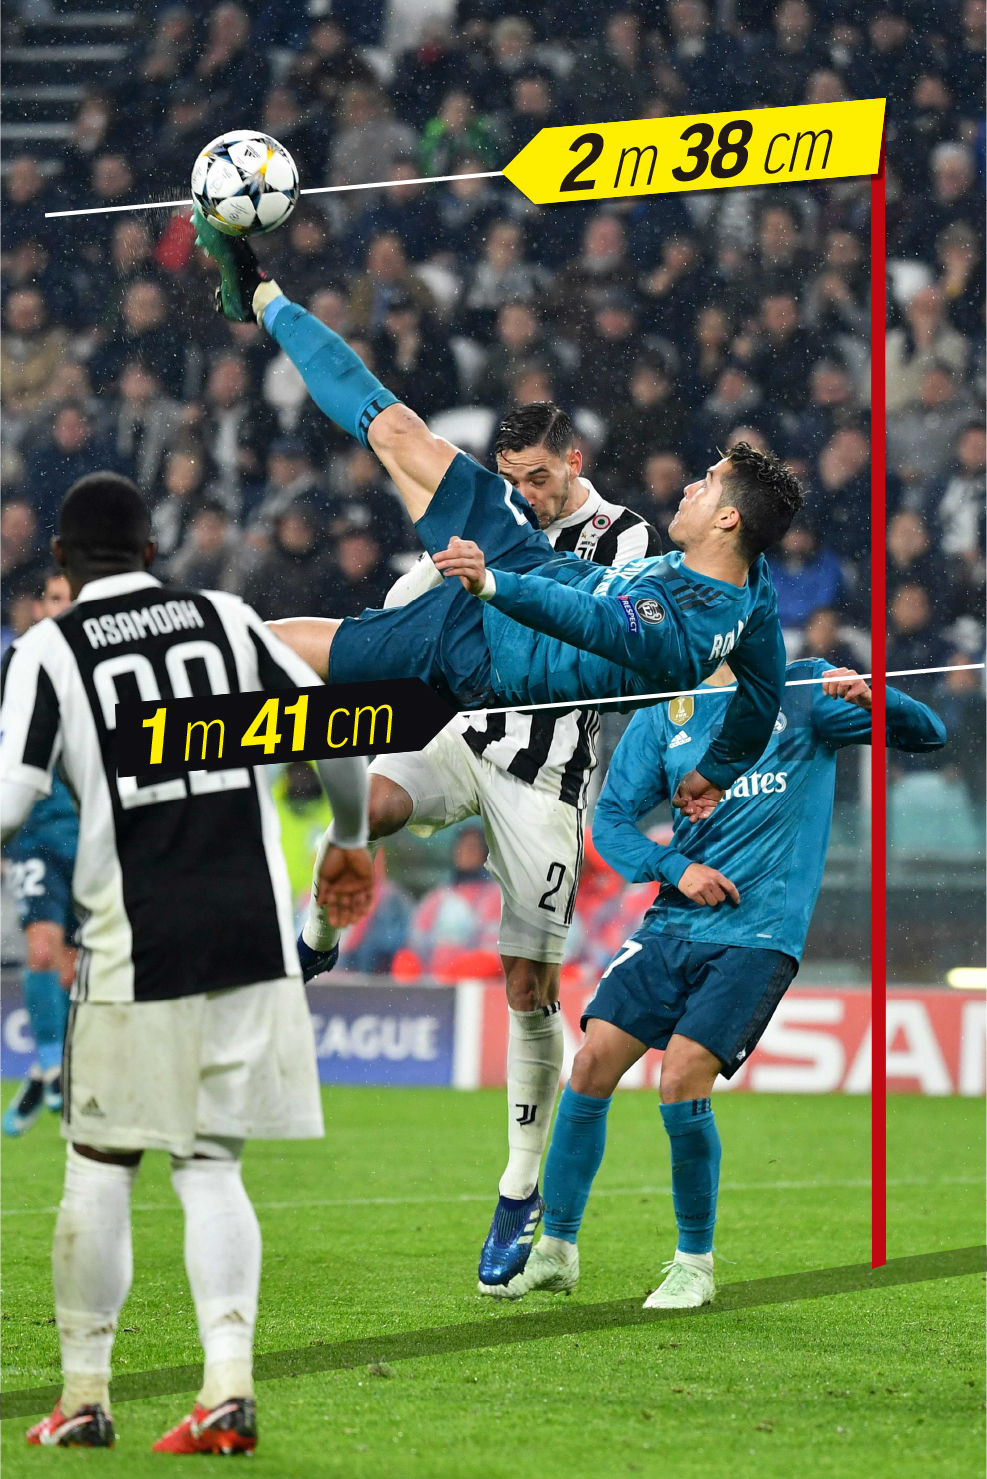 Real Madrid: Cristiano Ronaldo hit the overhead kick from the height of